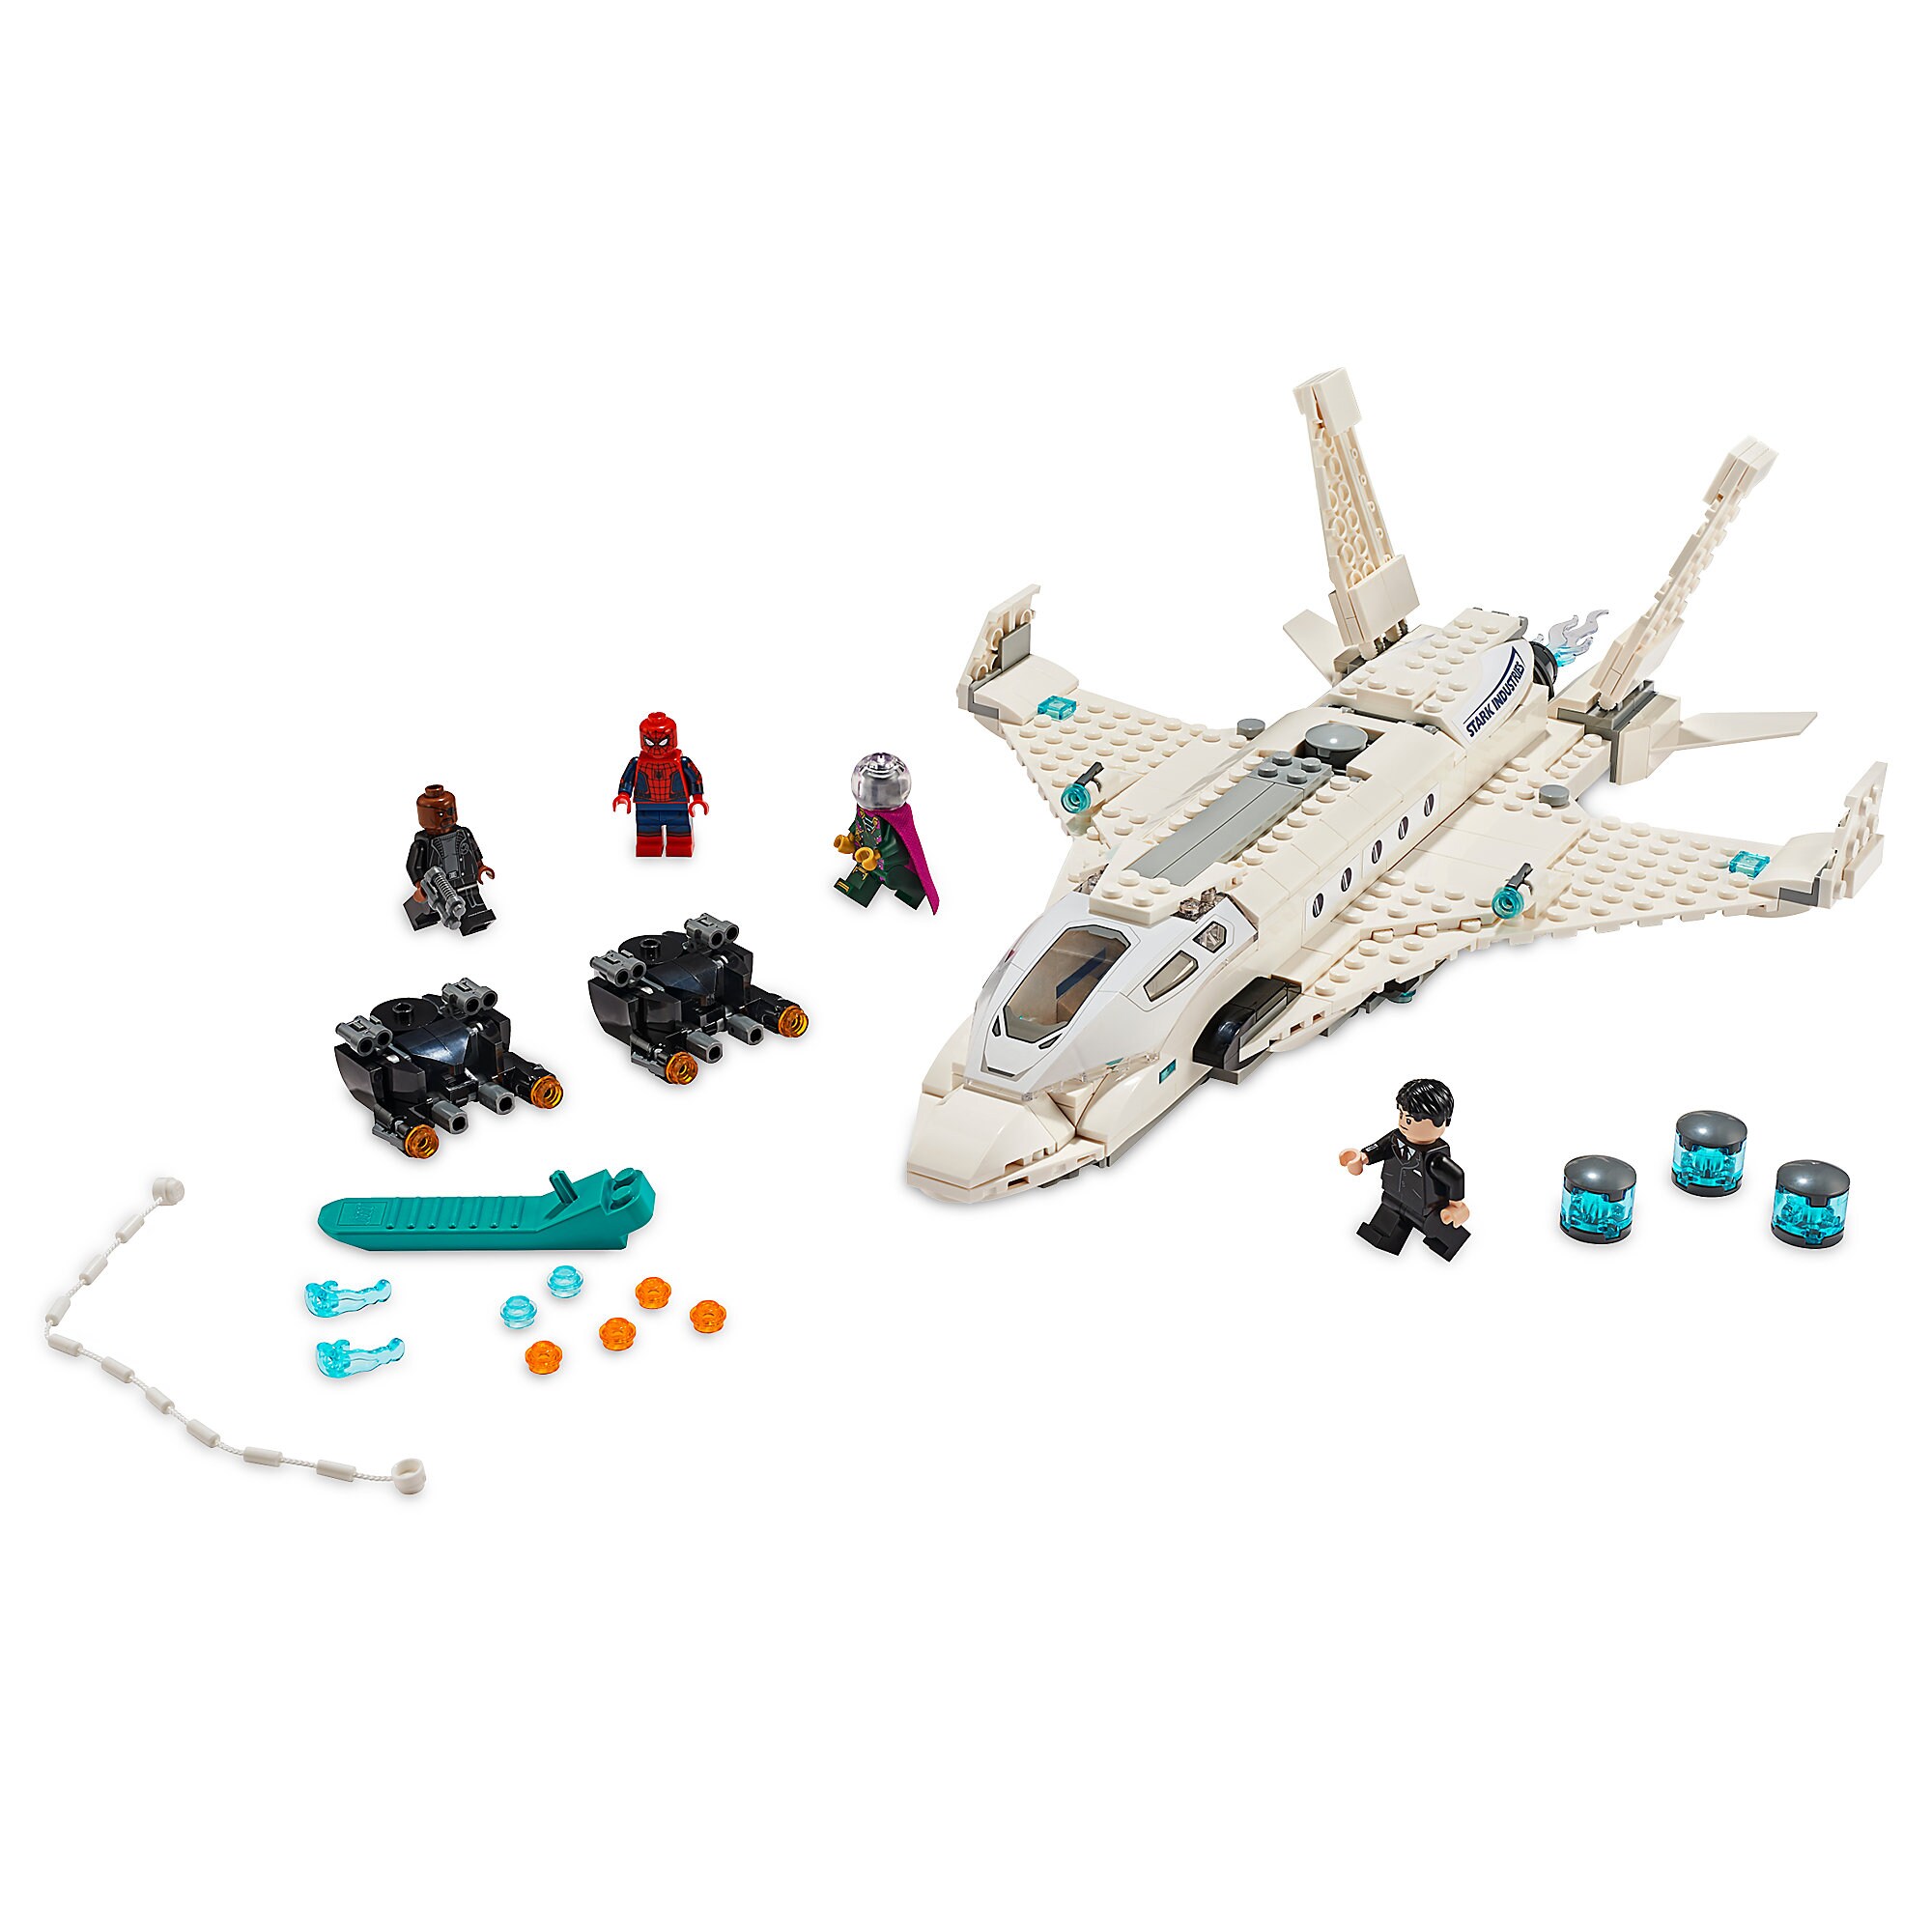 Spider-Man: Far From Home Stark Jet and the Drone Attack Play Set by LEGO